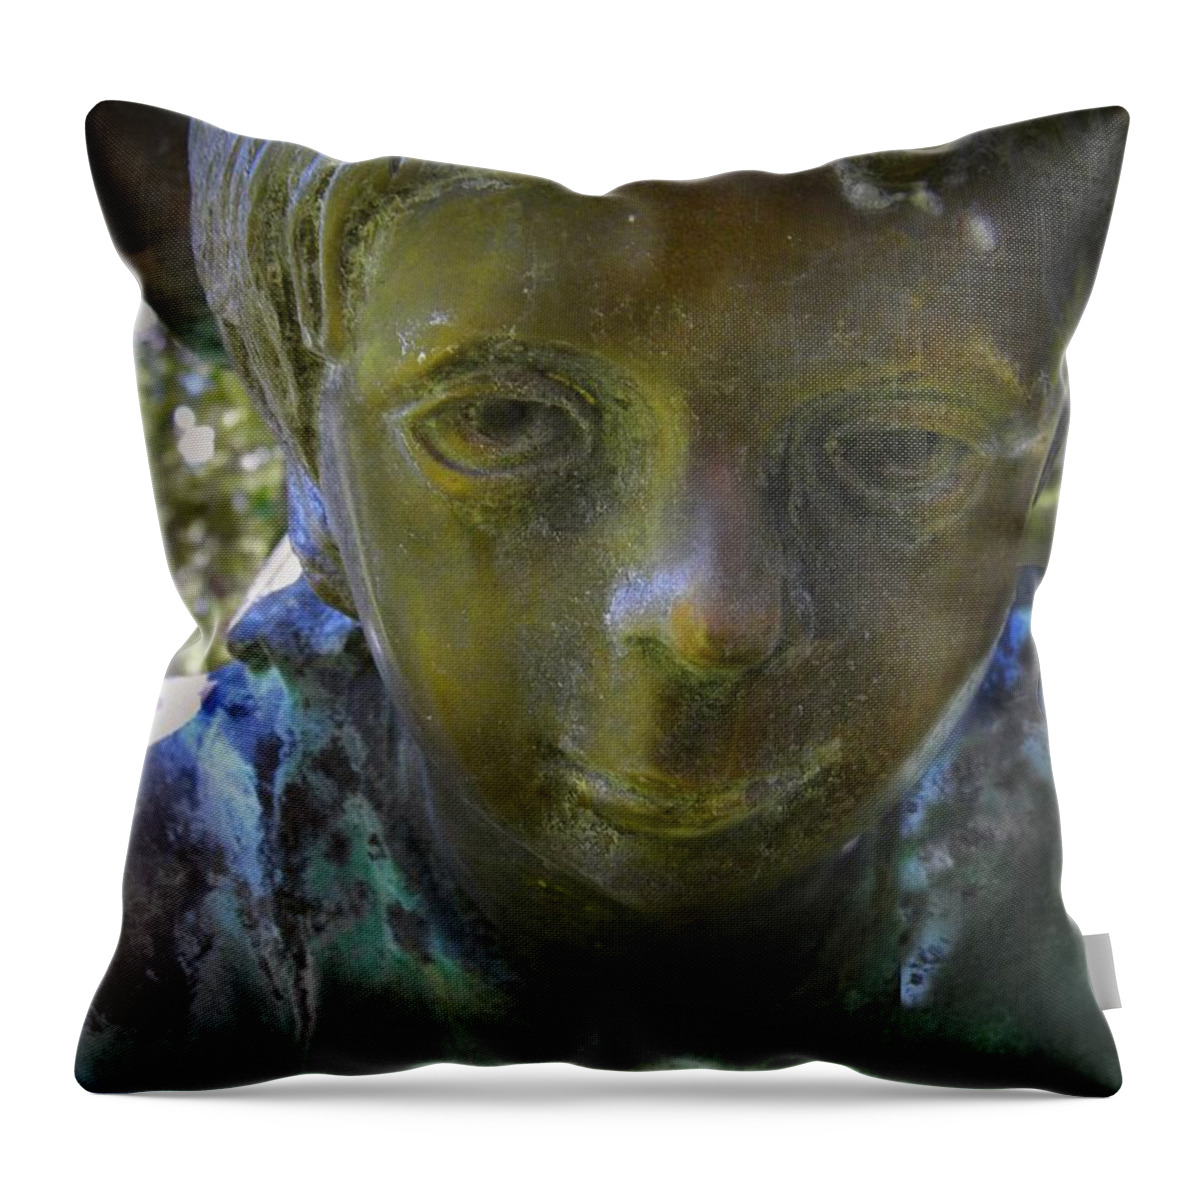 Bronze Children Throw Pillow featuring the photograph Look into My Eyes by Frank Wilson